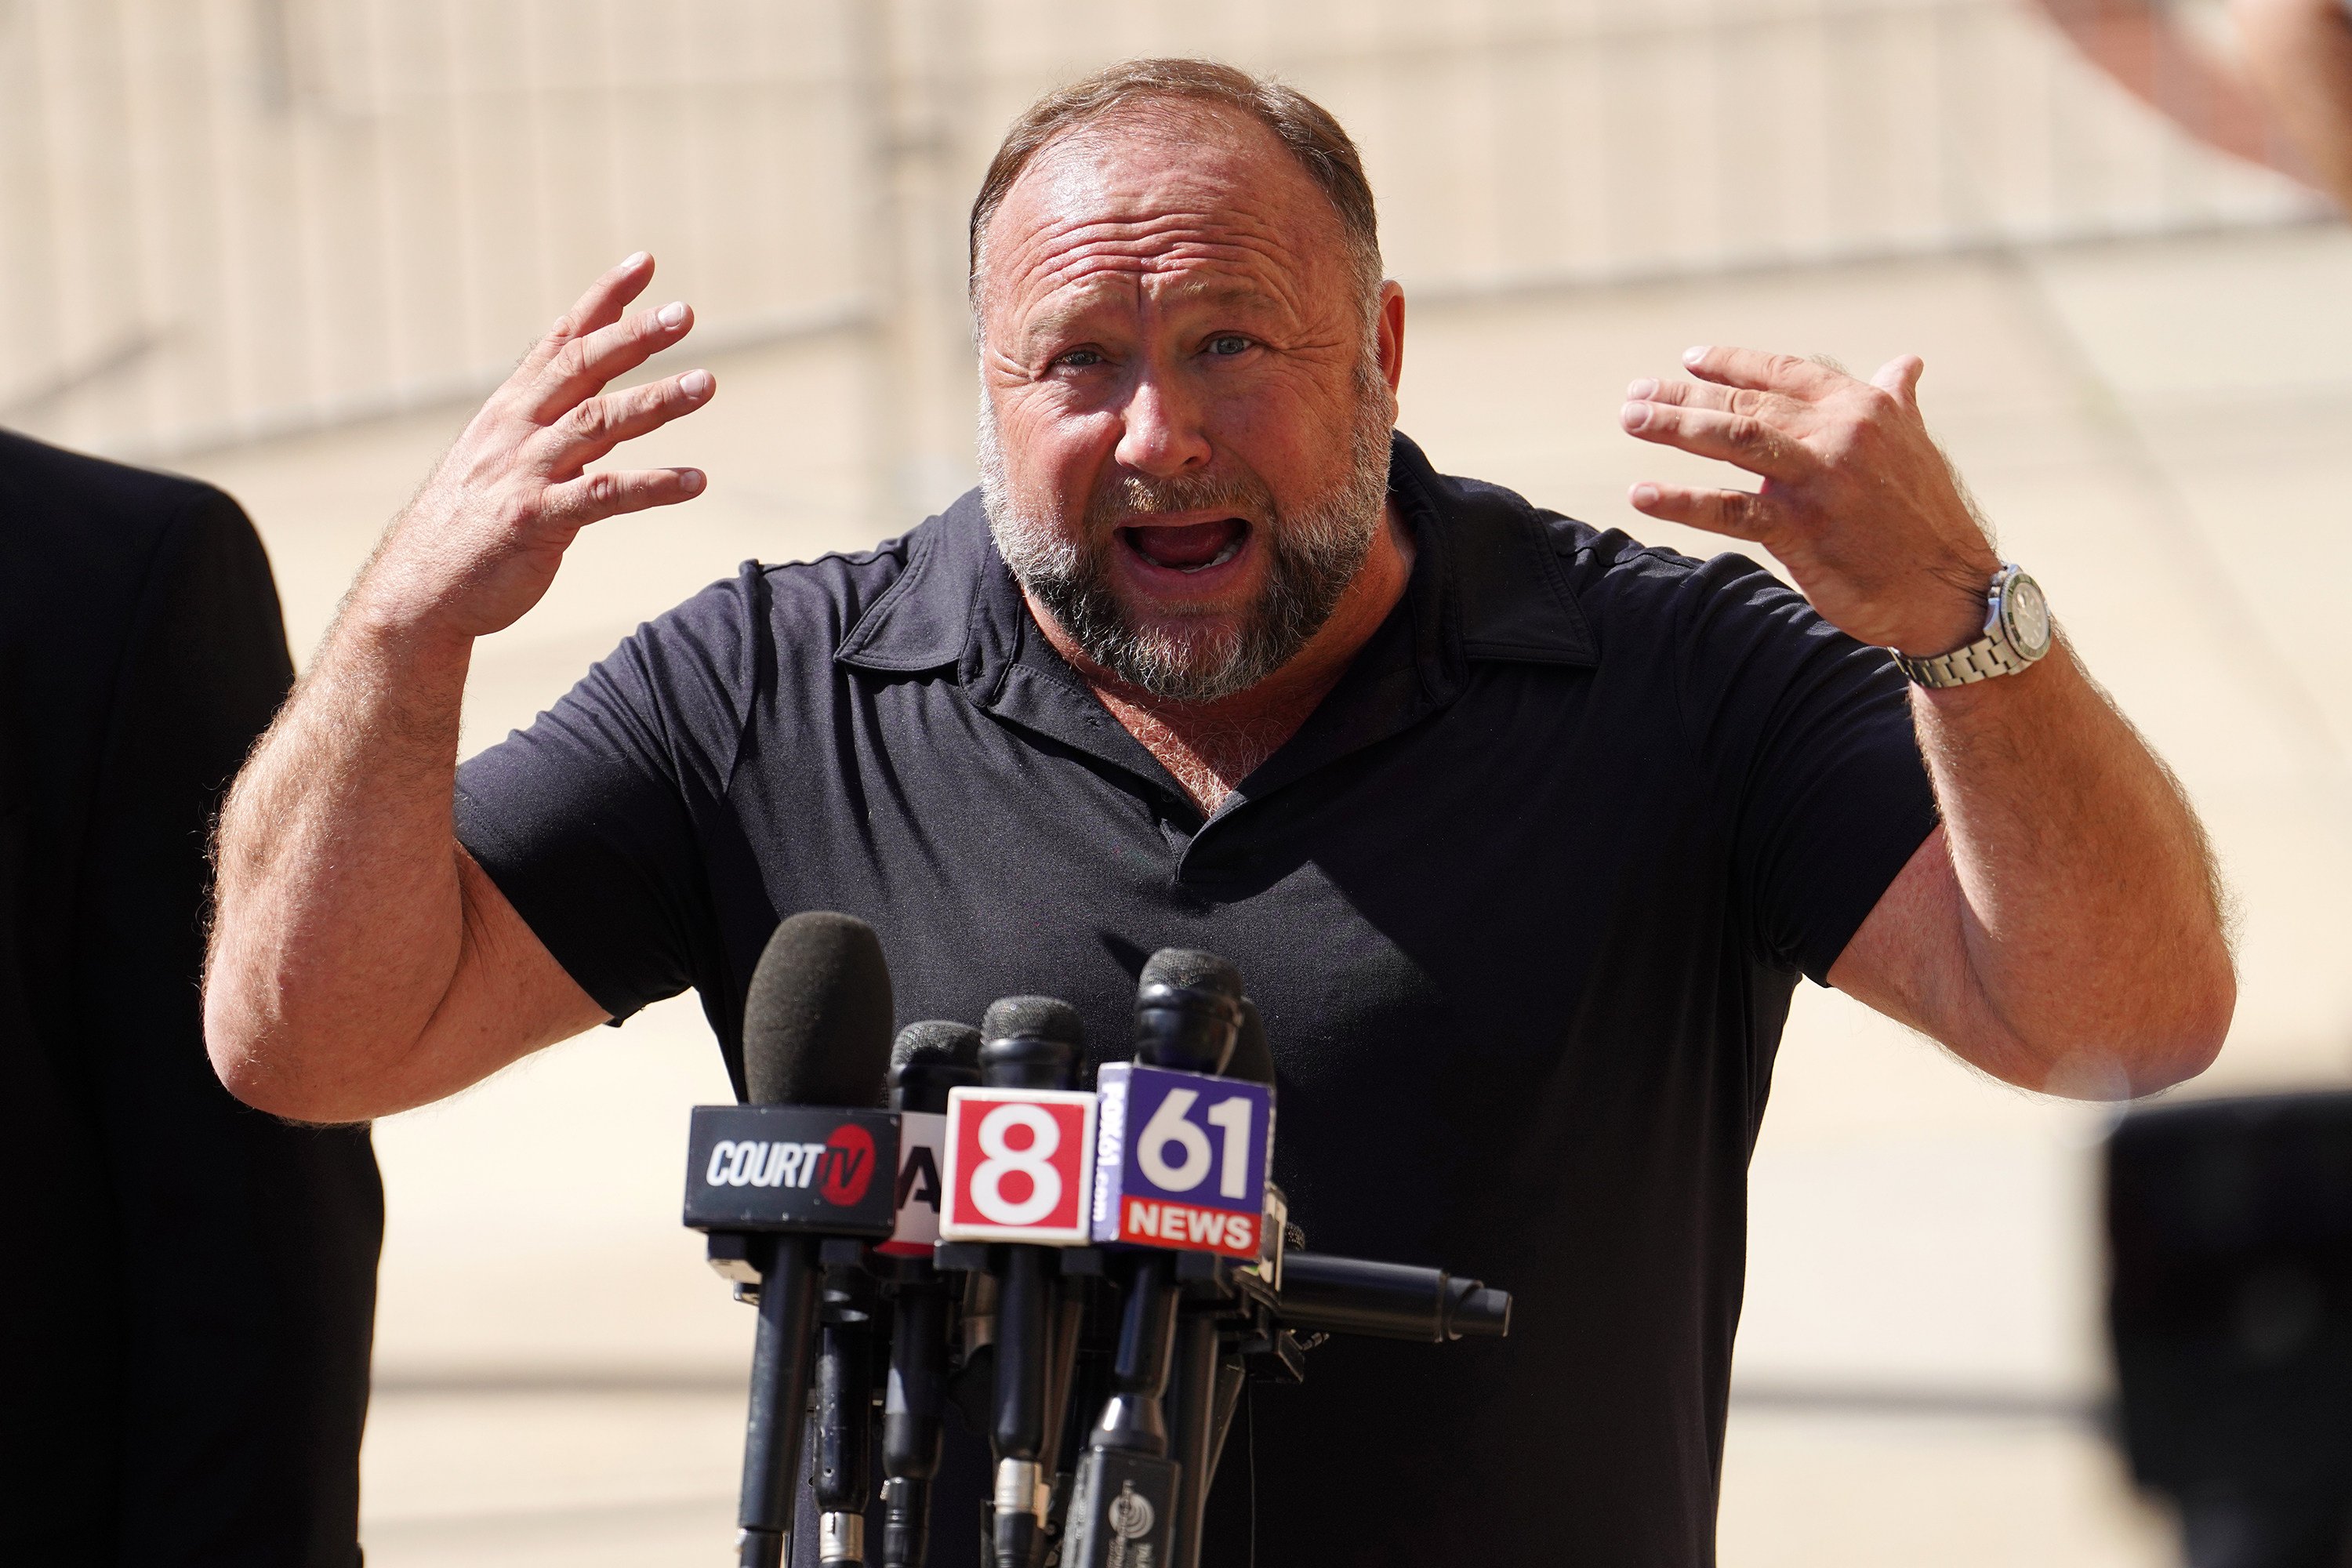 InfoWars founder Alex Jones speaks to the media outside Waterbury Superior Court during his trial in September 2022, in Waterbury, Connecticut. Photo: Getty Images/TNS